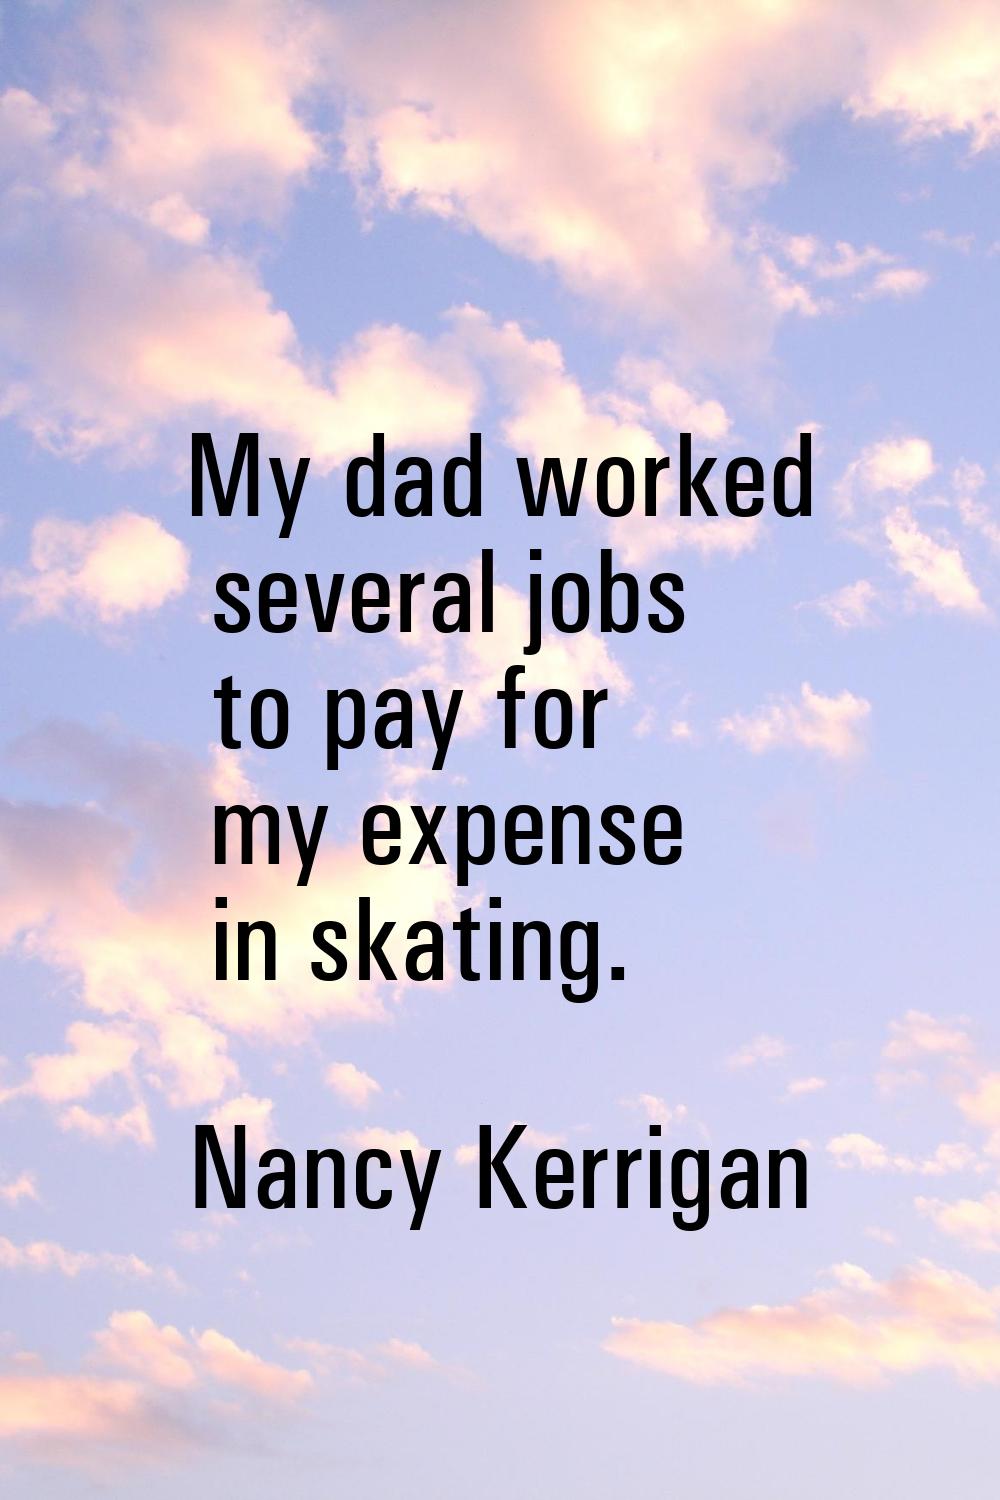 My dad worked several jobs to pay for my expense in skating.